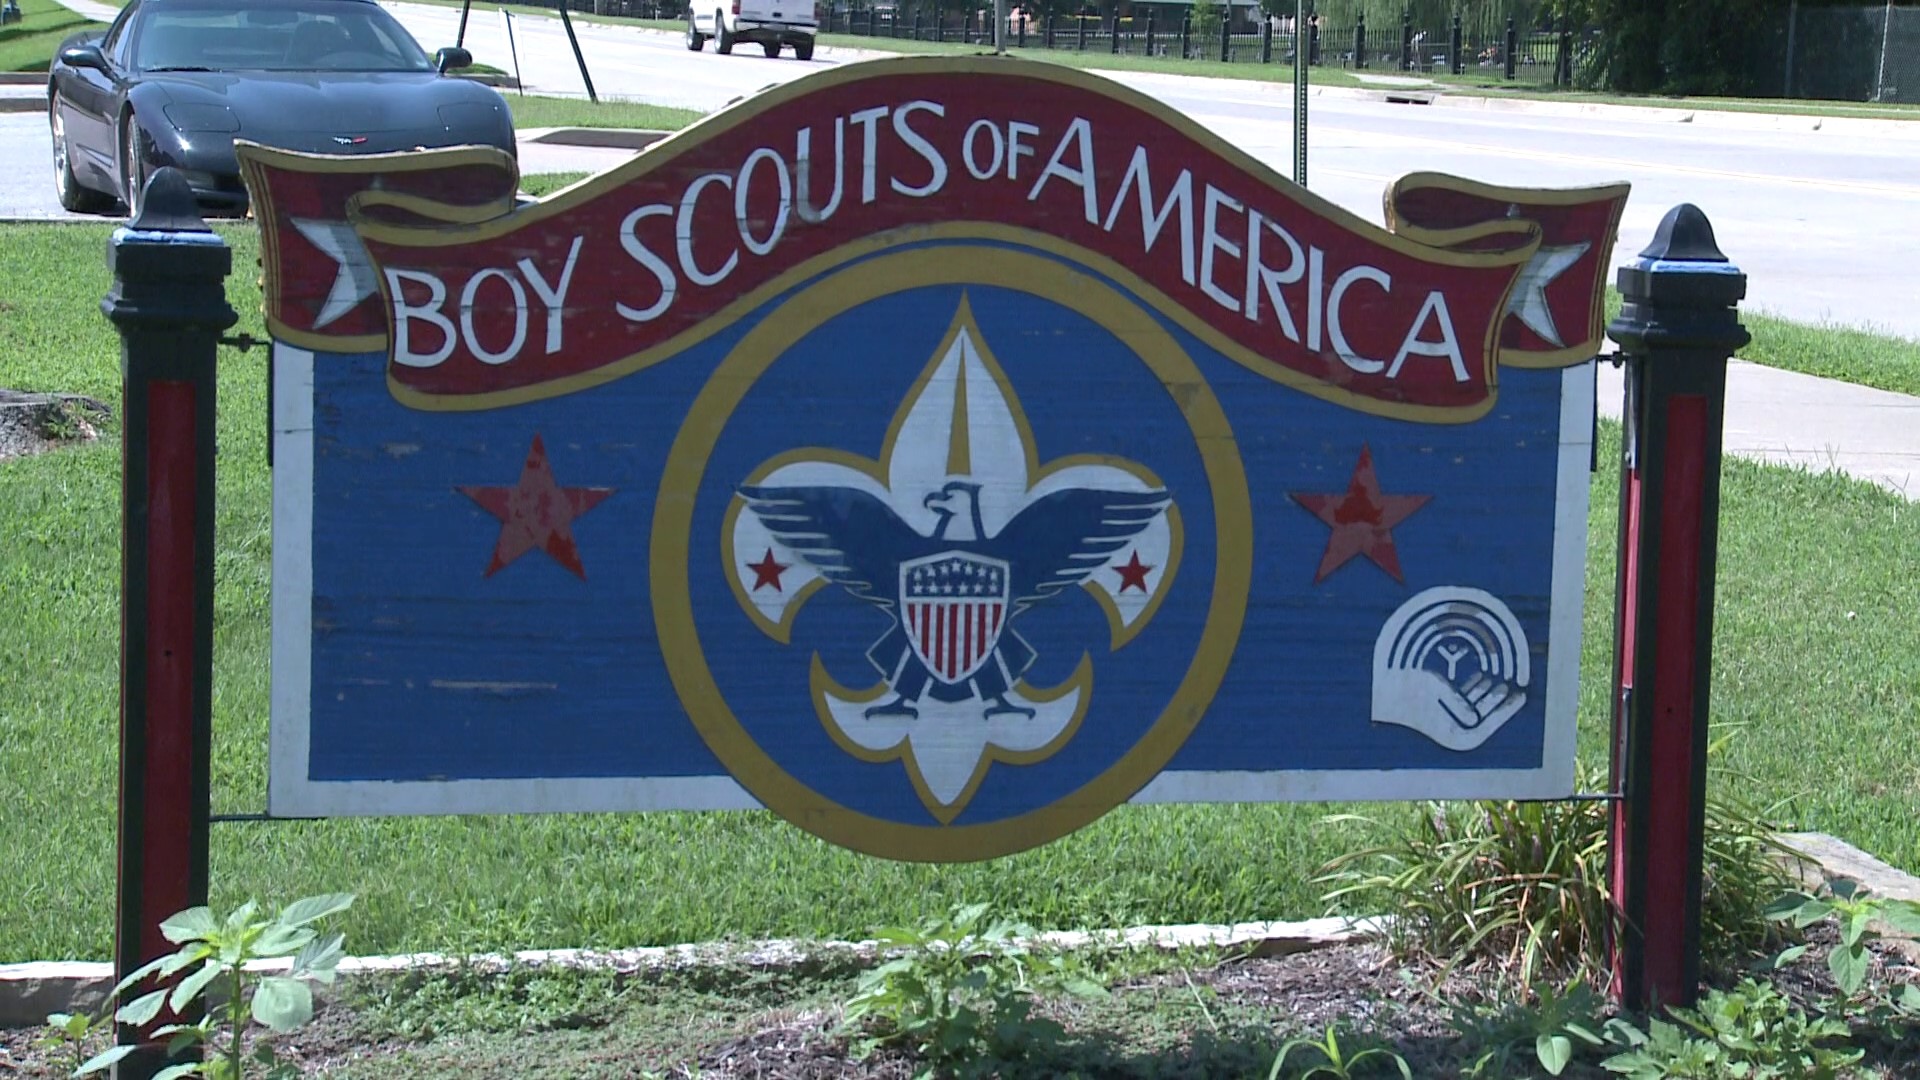 The Scouts are looking for students to join.  Daren speaks with a local Executive Director about the program and how to sign up.